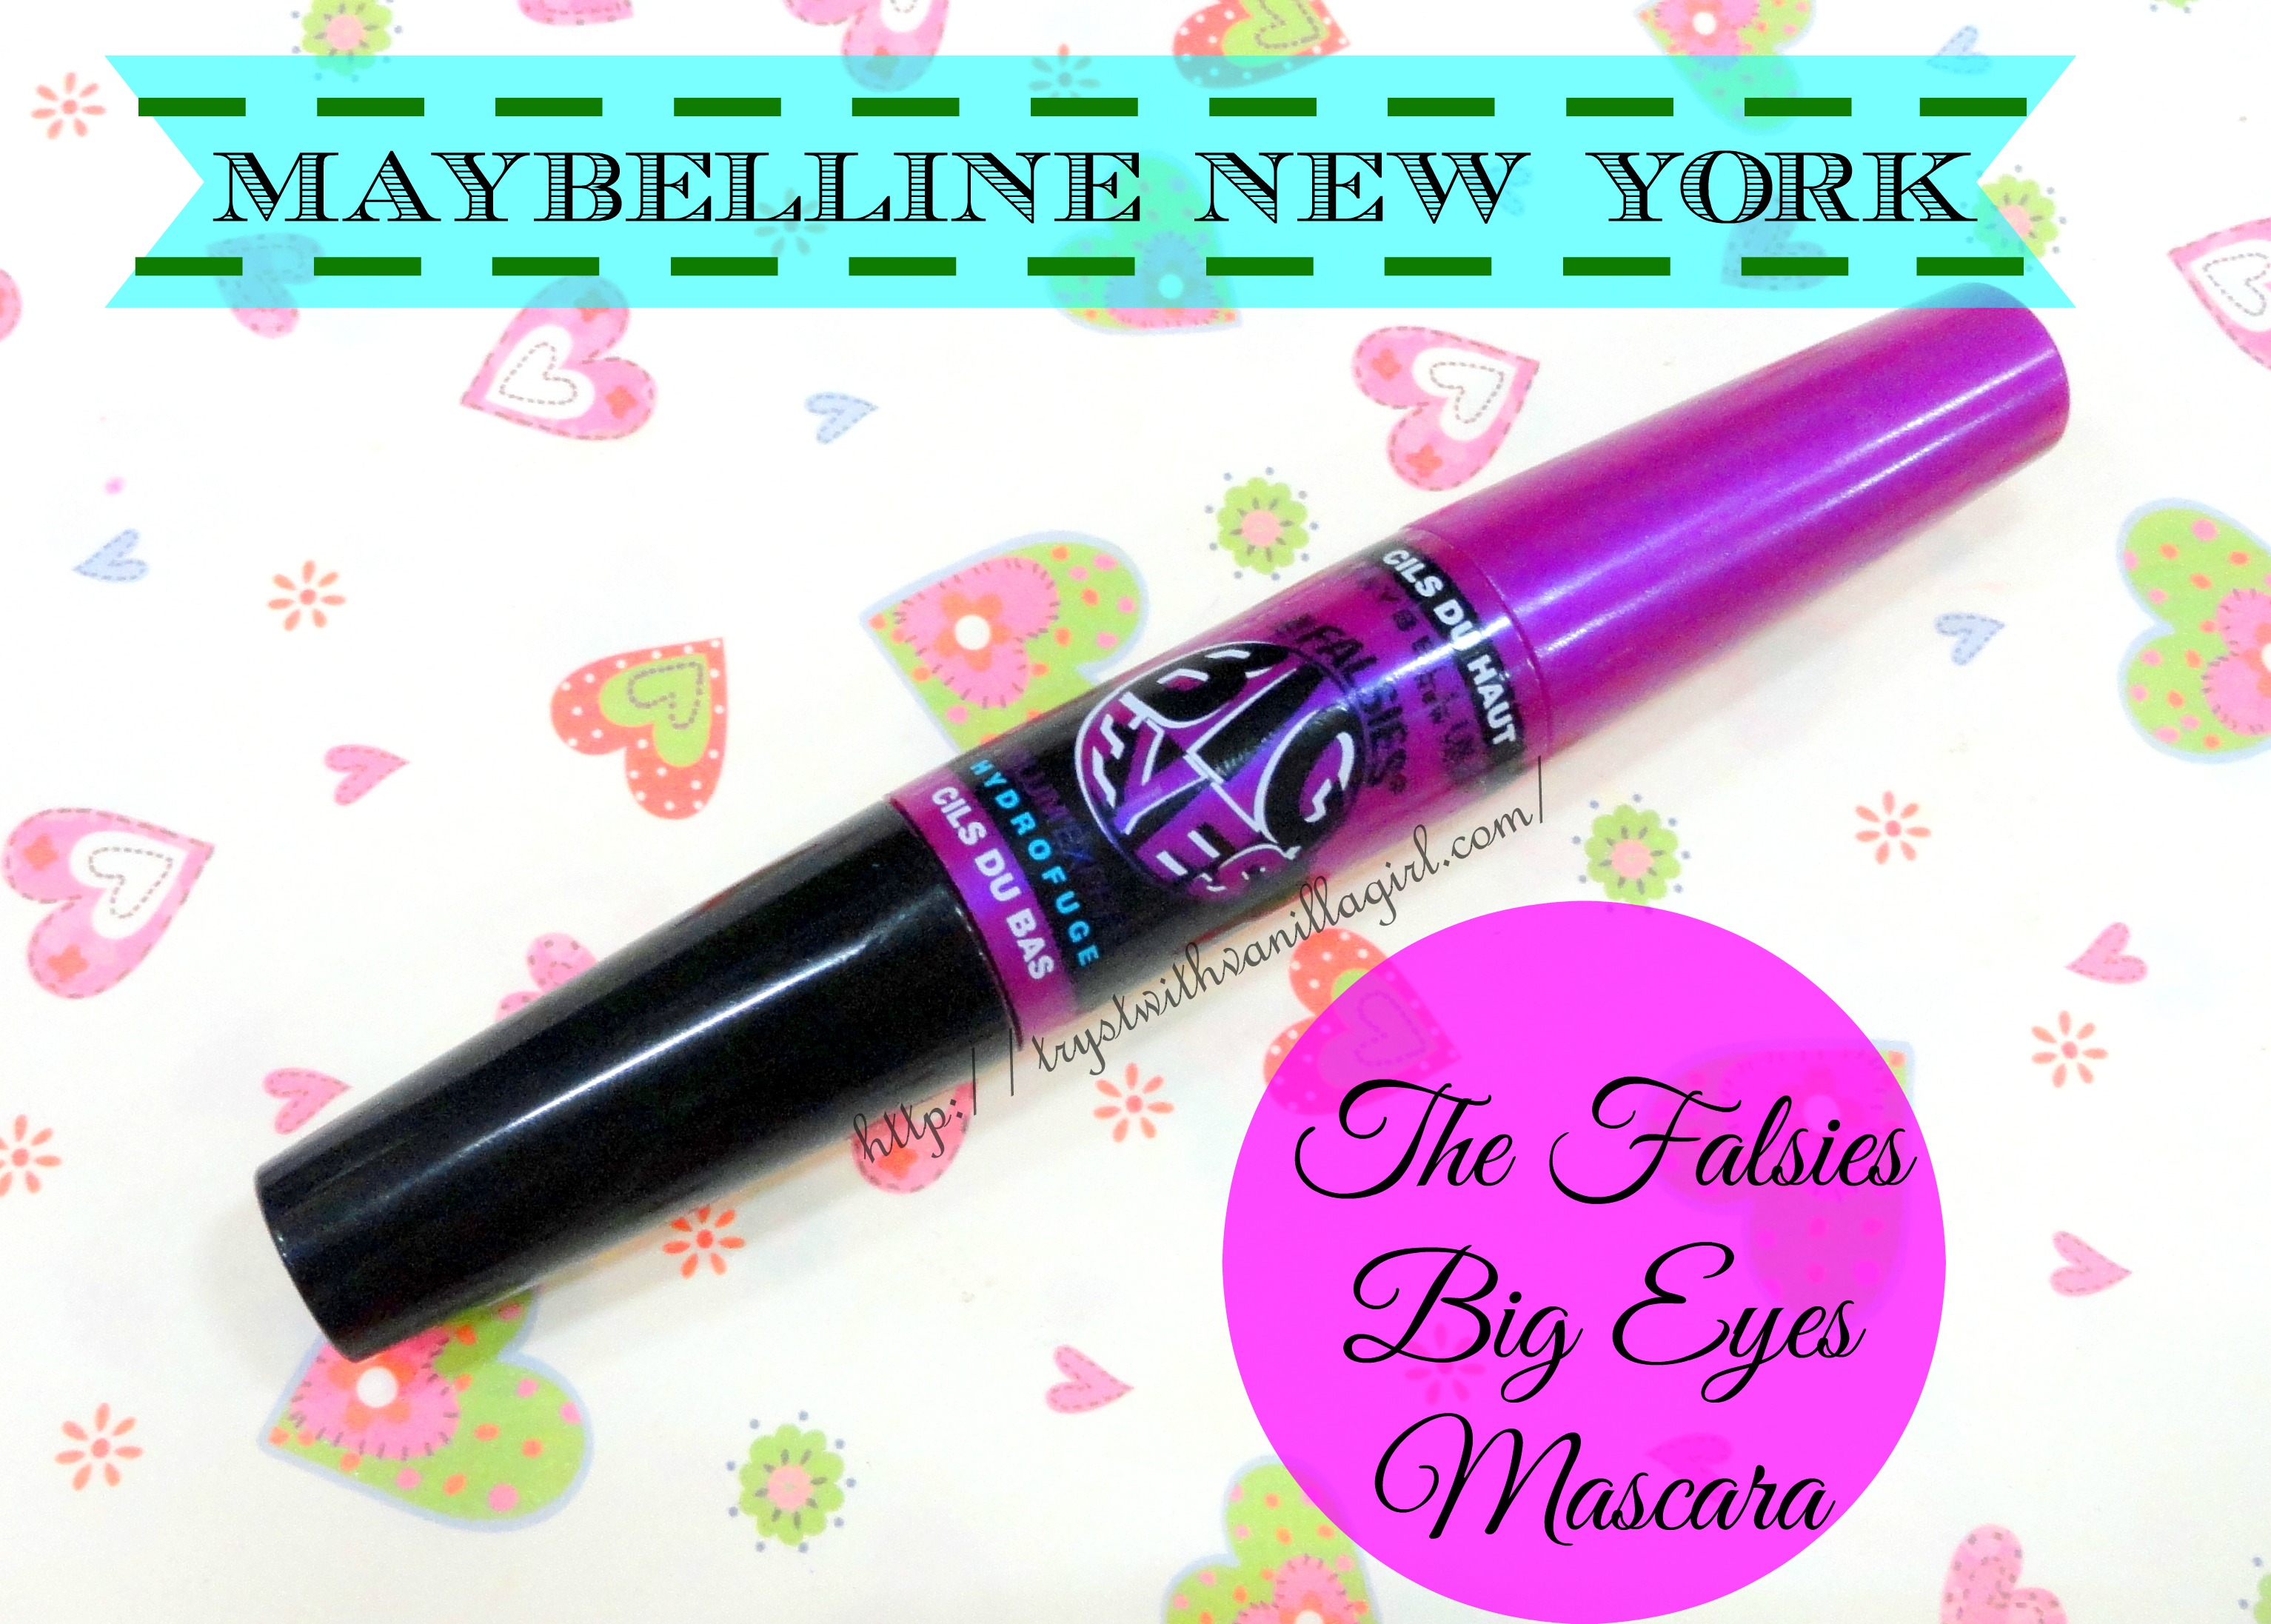 Maybelline The Falsies Big Eyes Mascara Review,Price in India,December Beauty Favorites